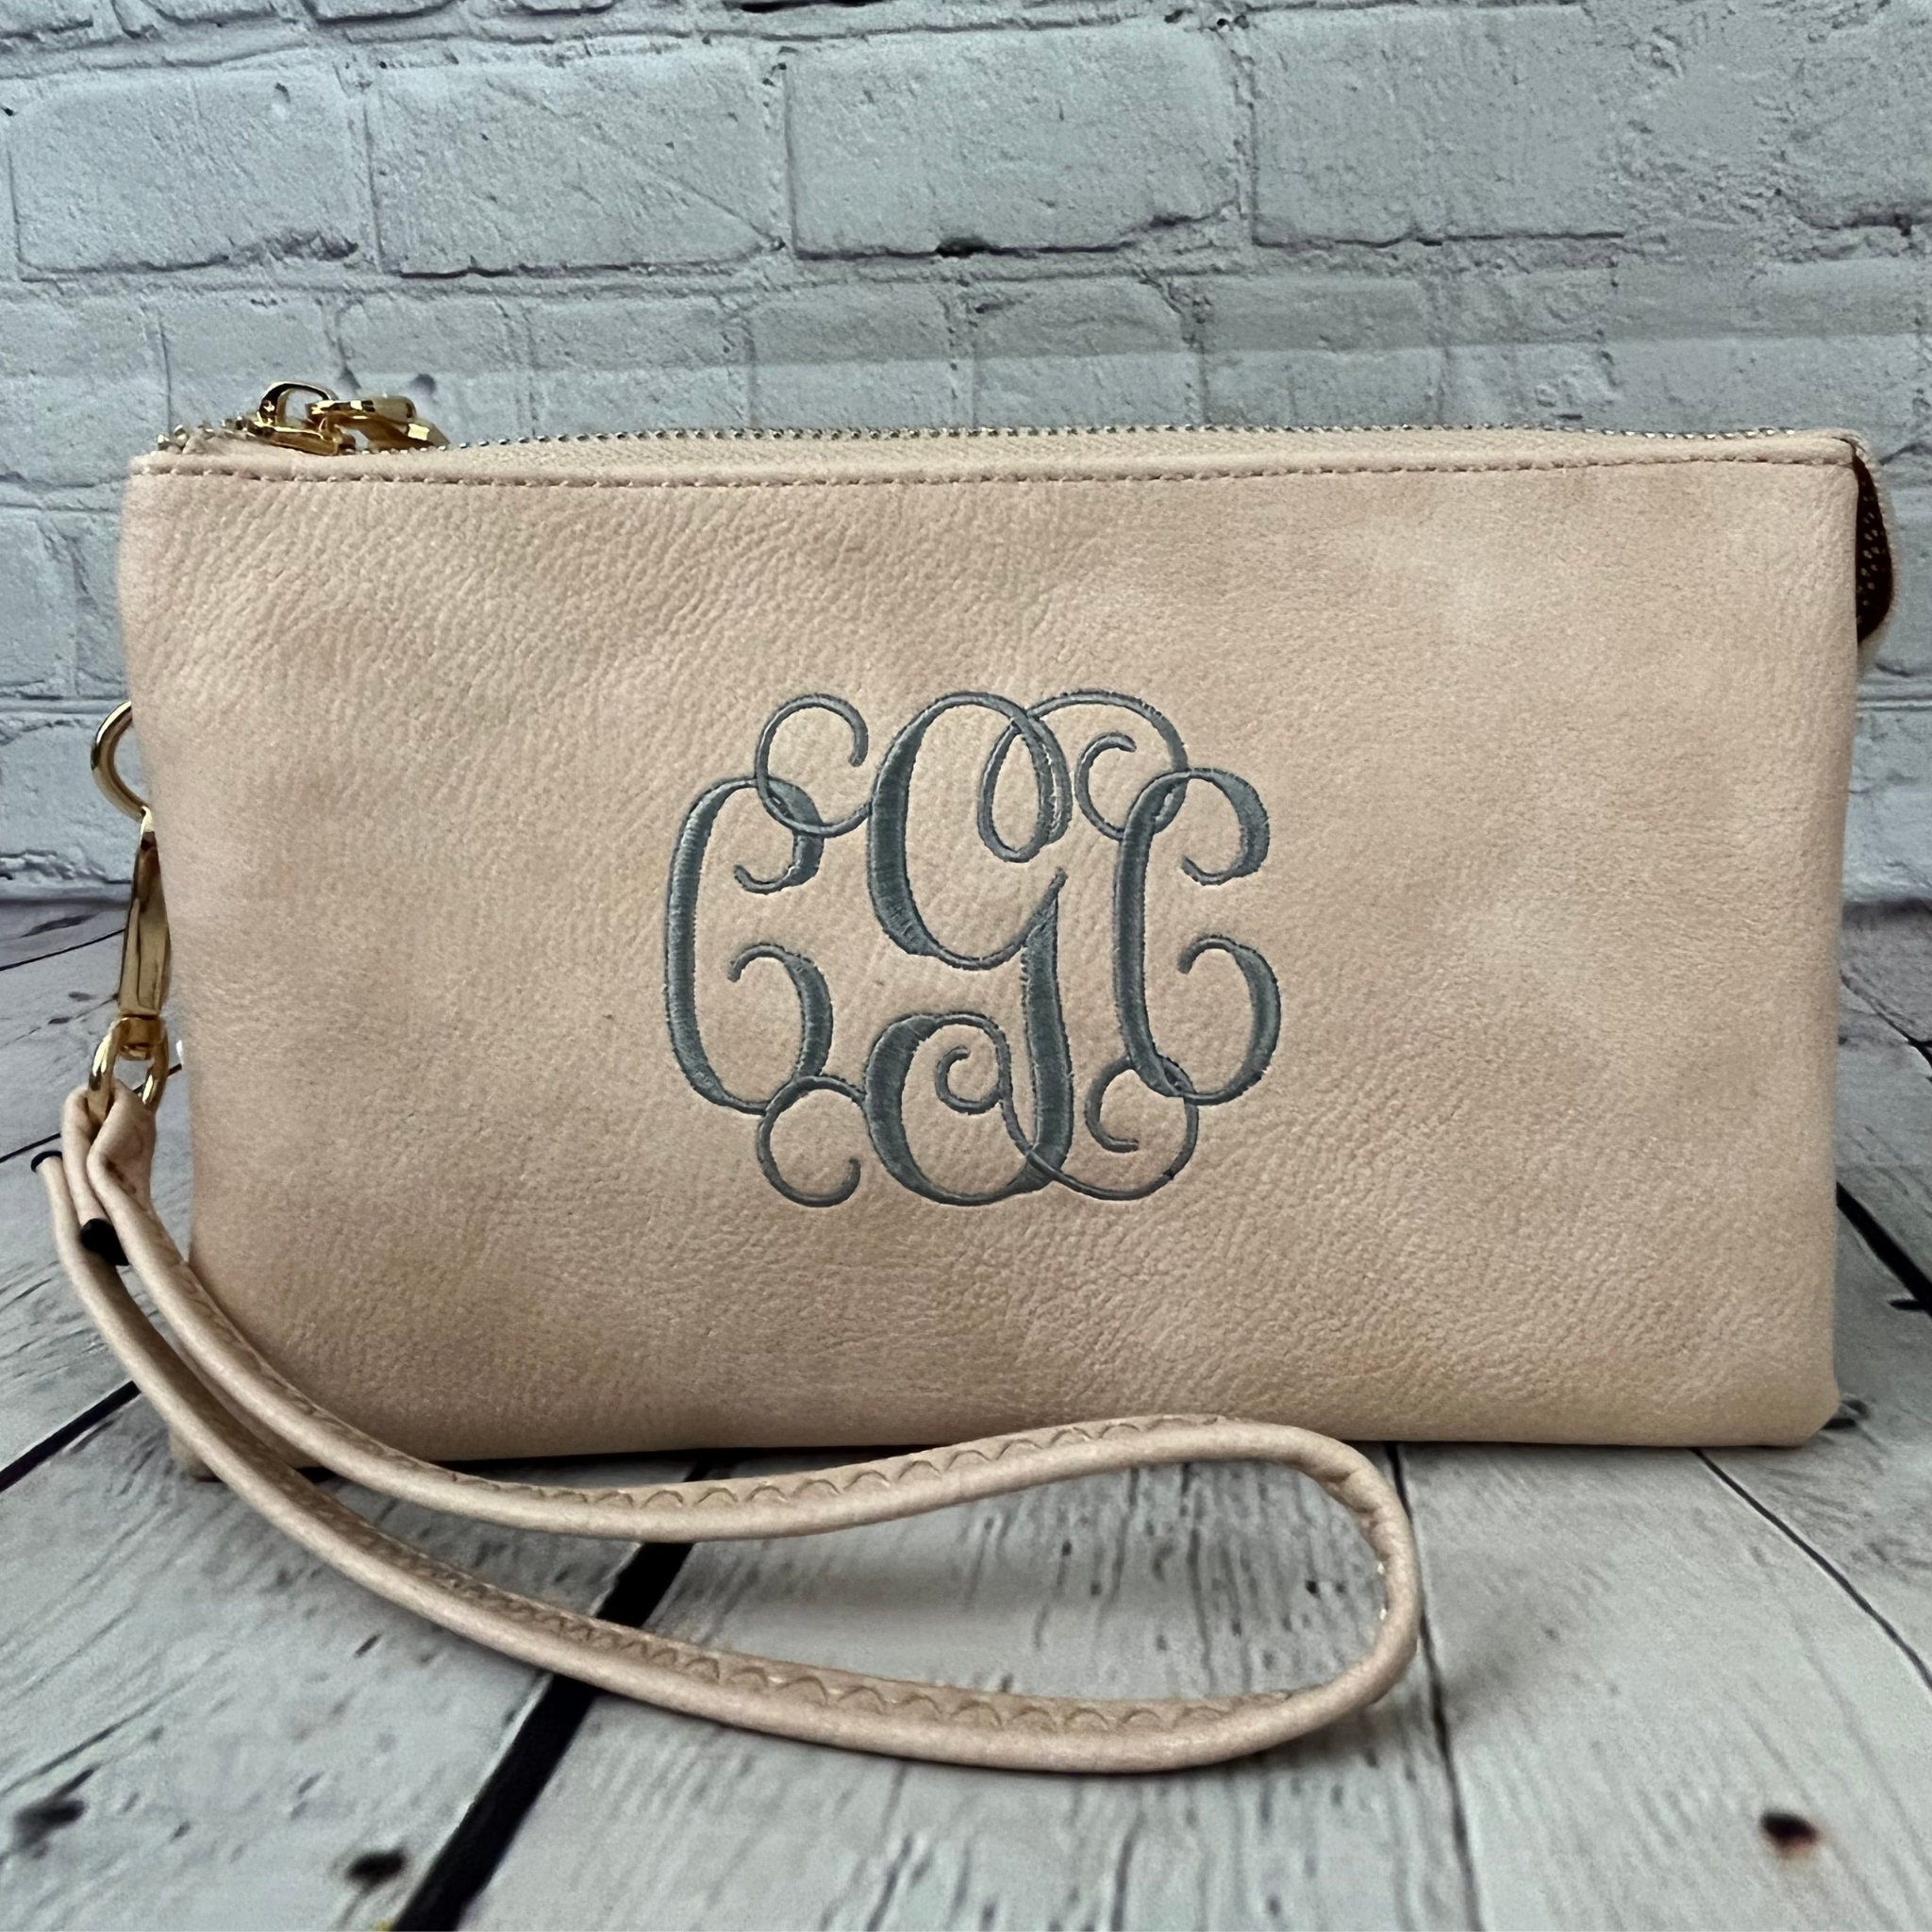 Monogrammed Vegan Leather Clutch 3 Compartment Crossbody Purse Bridesmaid Gift - 30+ Colors New! Gray